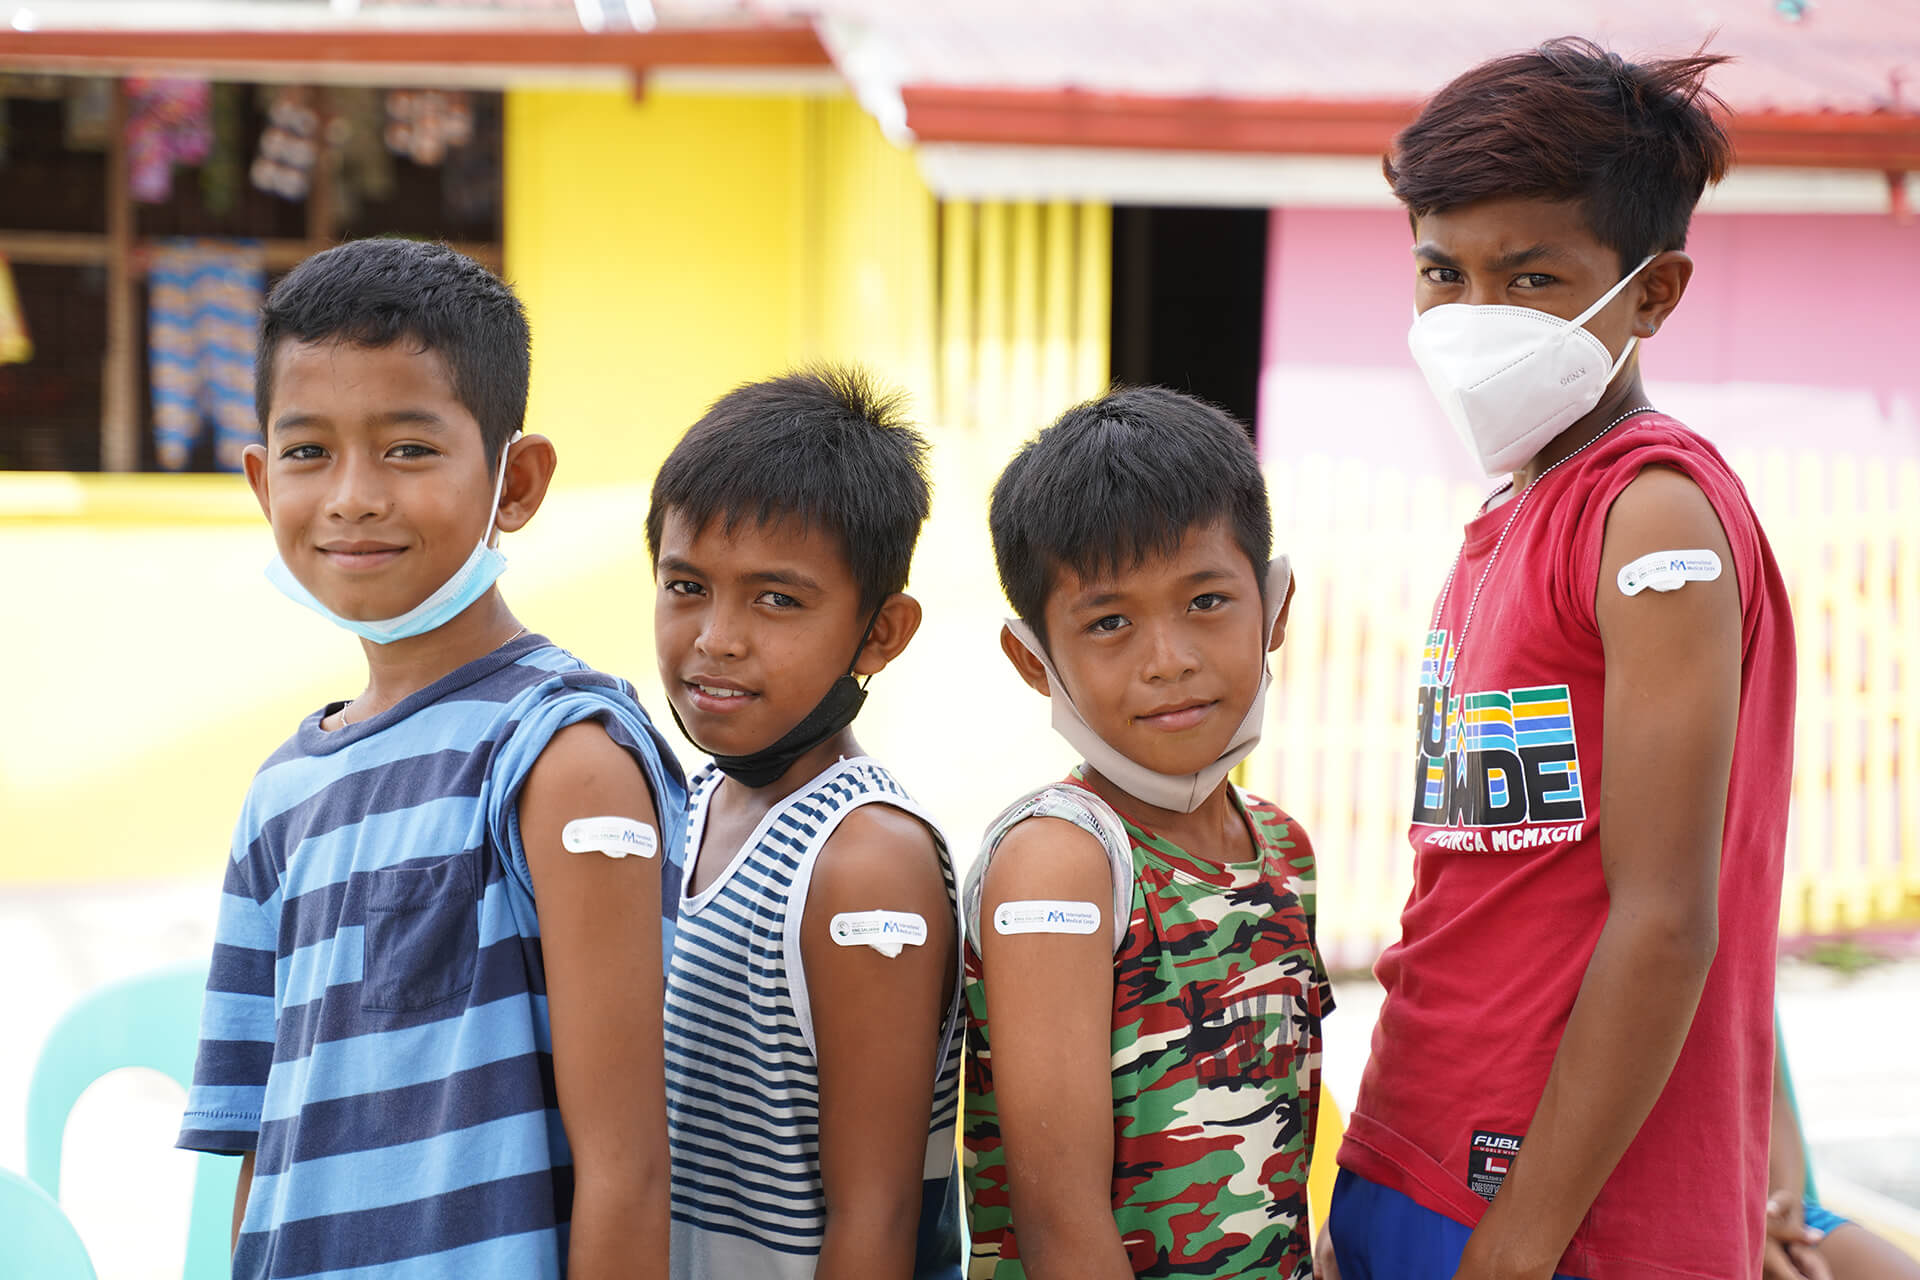 Four boys proudly show off their International Medical Corps bandages after being vaccinated against COVID-19.